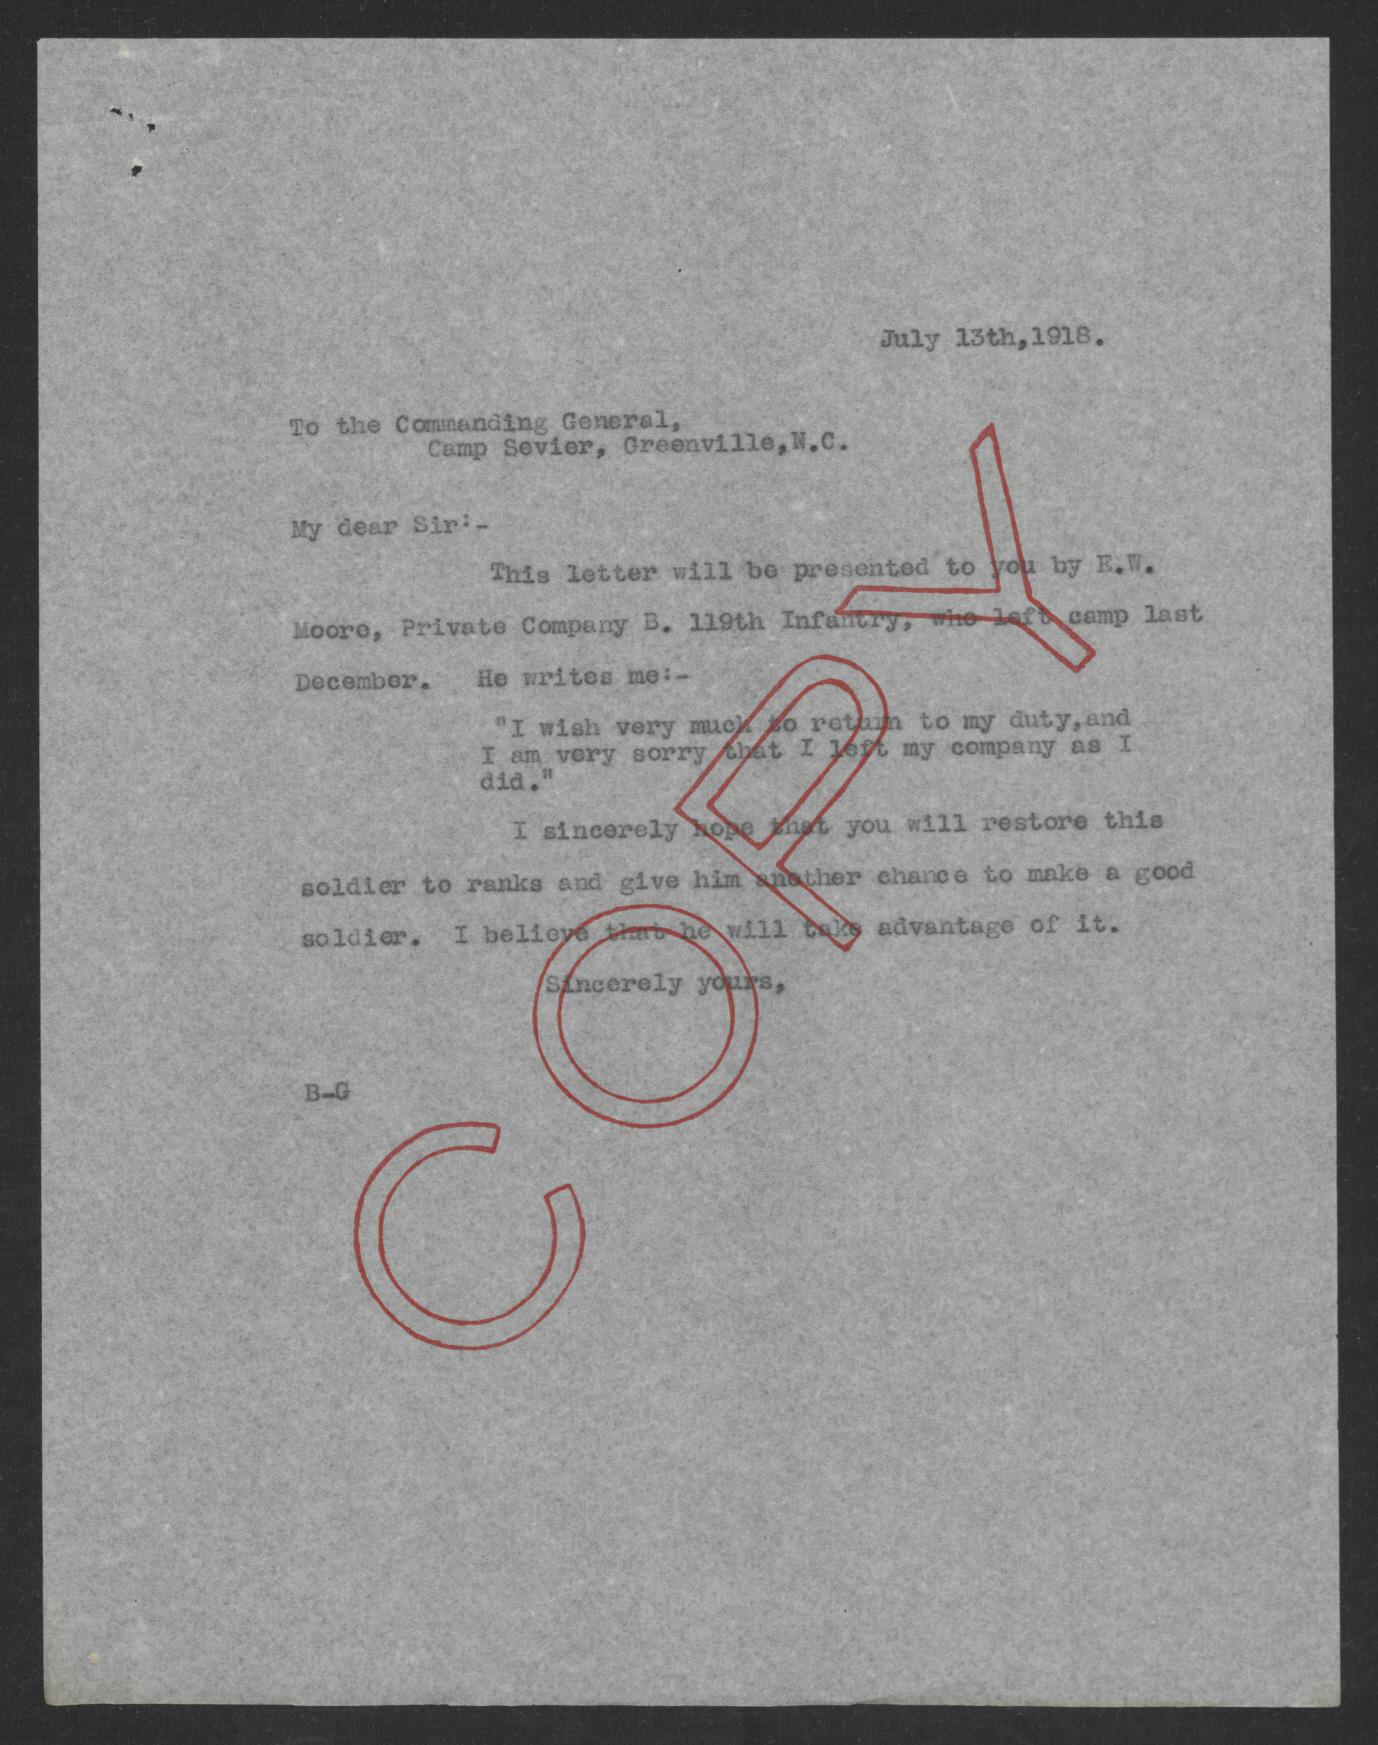 Letter from Thomas W. Bickett to the Commanding General of Camp Sevier, July 13, 1918